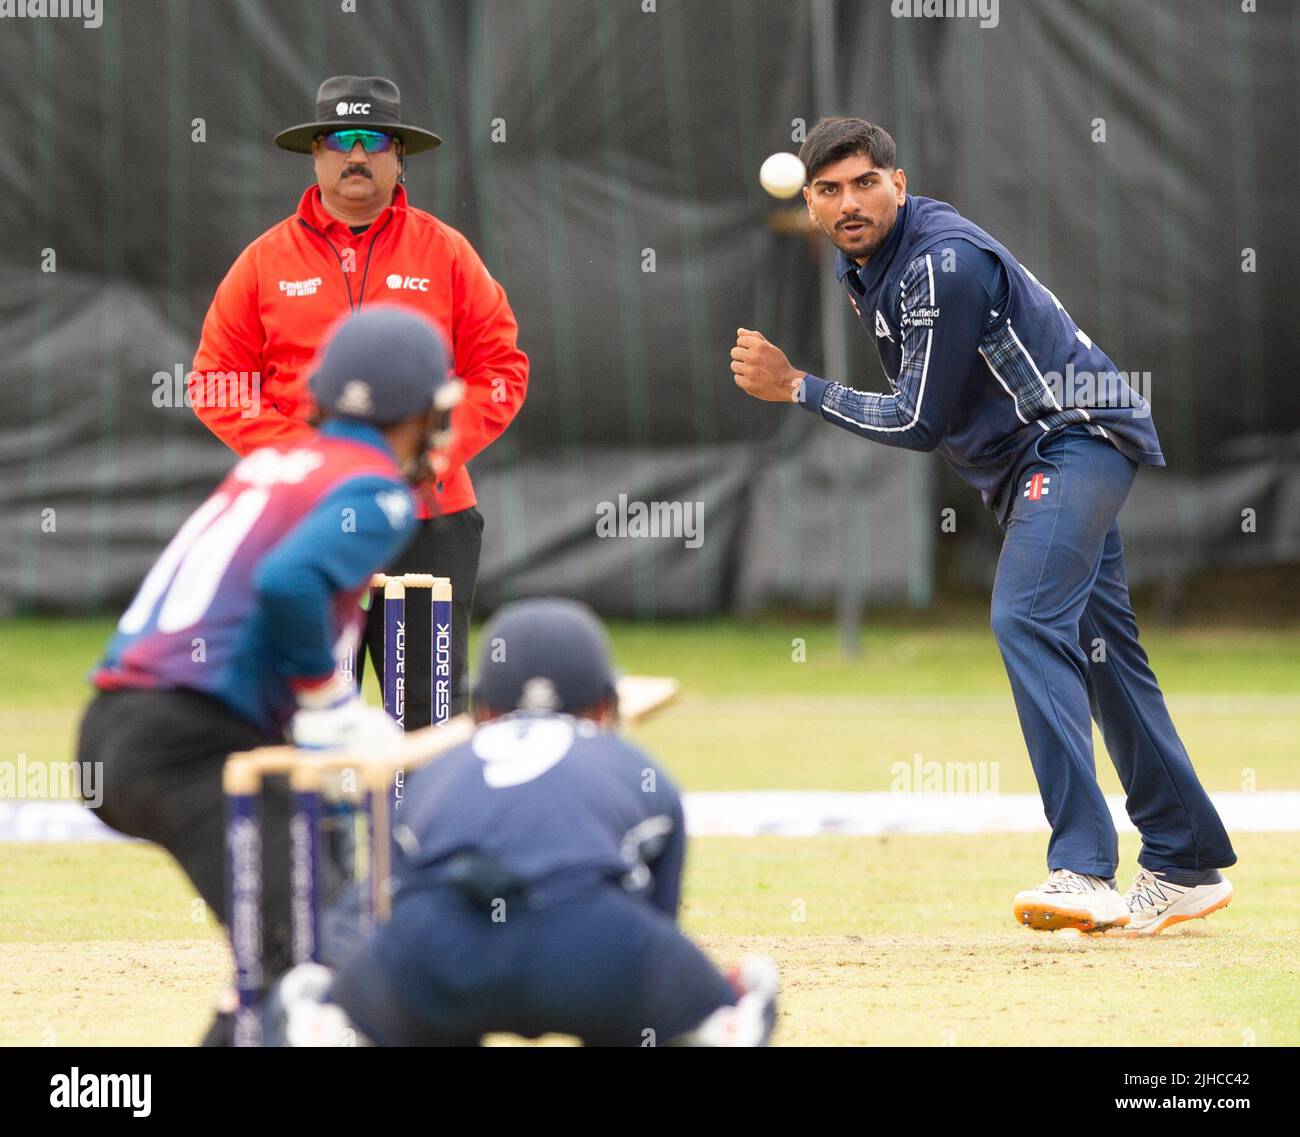 ICC Men's Cricket World Cup League 2 - Scotland v, Nepal. 17th July, 2022. Scotland take on Nepal for the second time in the ICC Div 2 Men's Cricket World Cup League 2 at Titwood, Glasgow. Pic shows: Scotland's Hamza Tahir bowls. Credit: Ian Jacobs/Alamy Live News Stock Photo